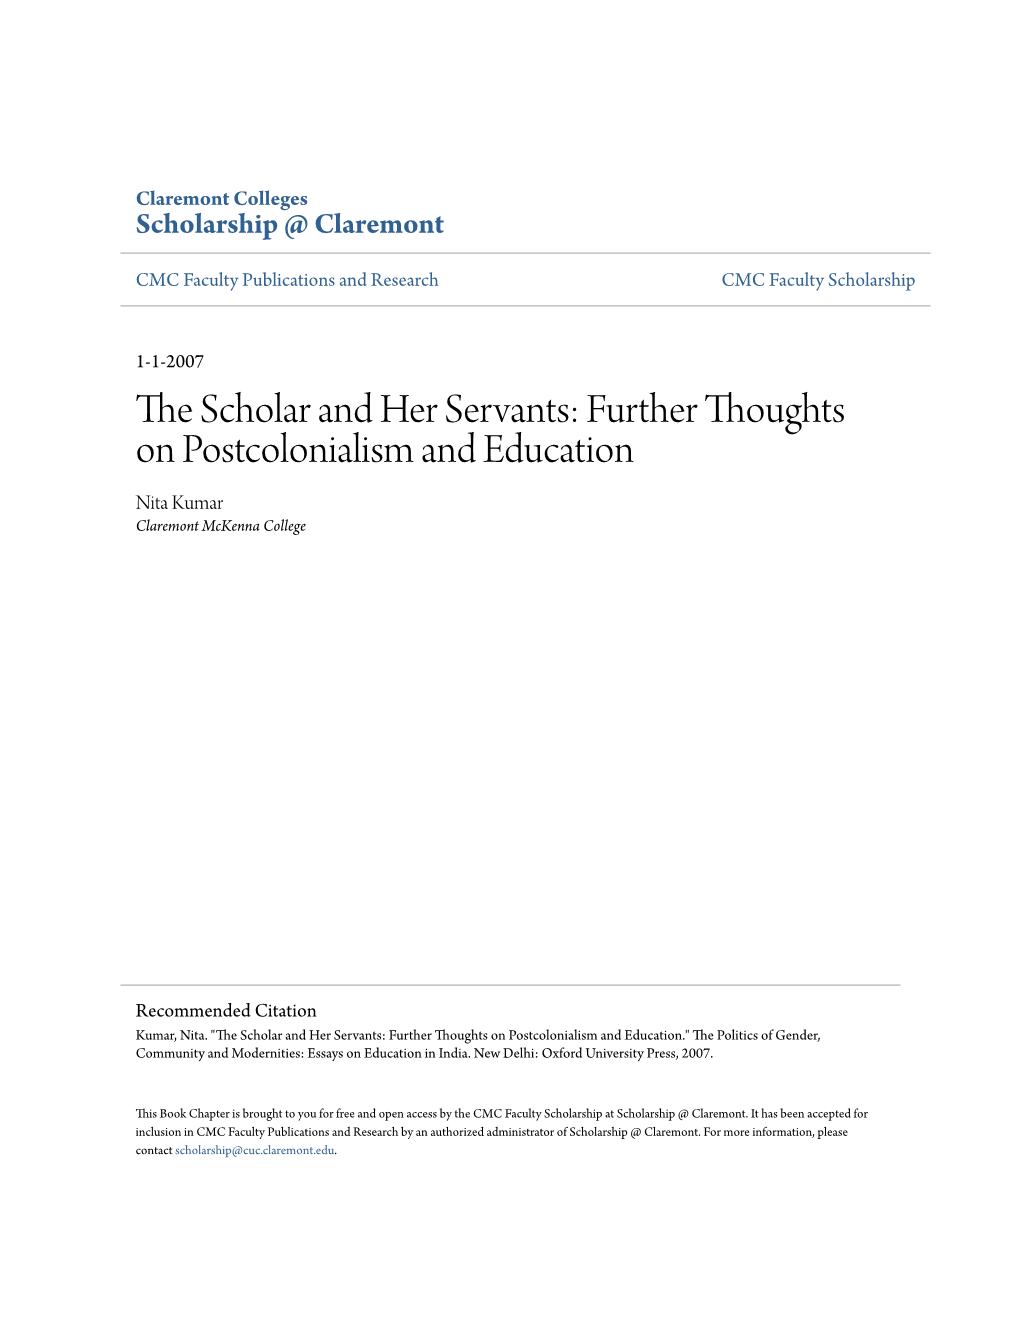 The Scholar and Her Servants: Further Thoughts on Postcolonialism and Education